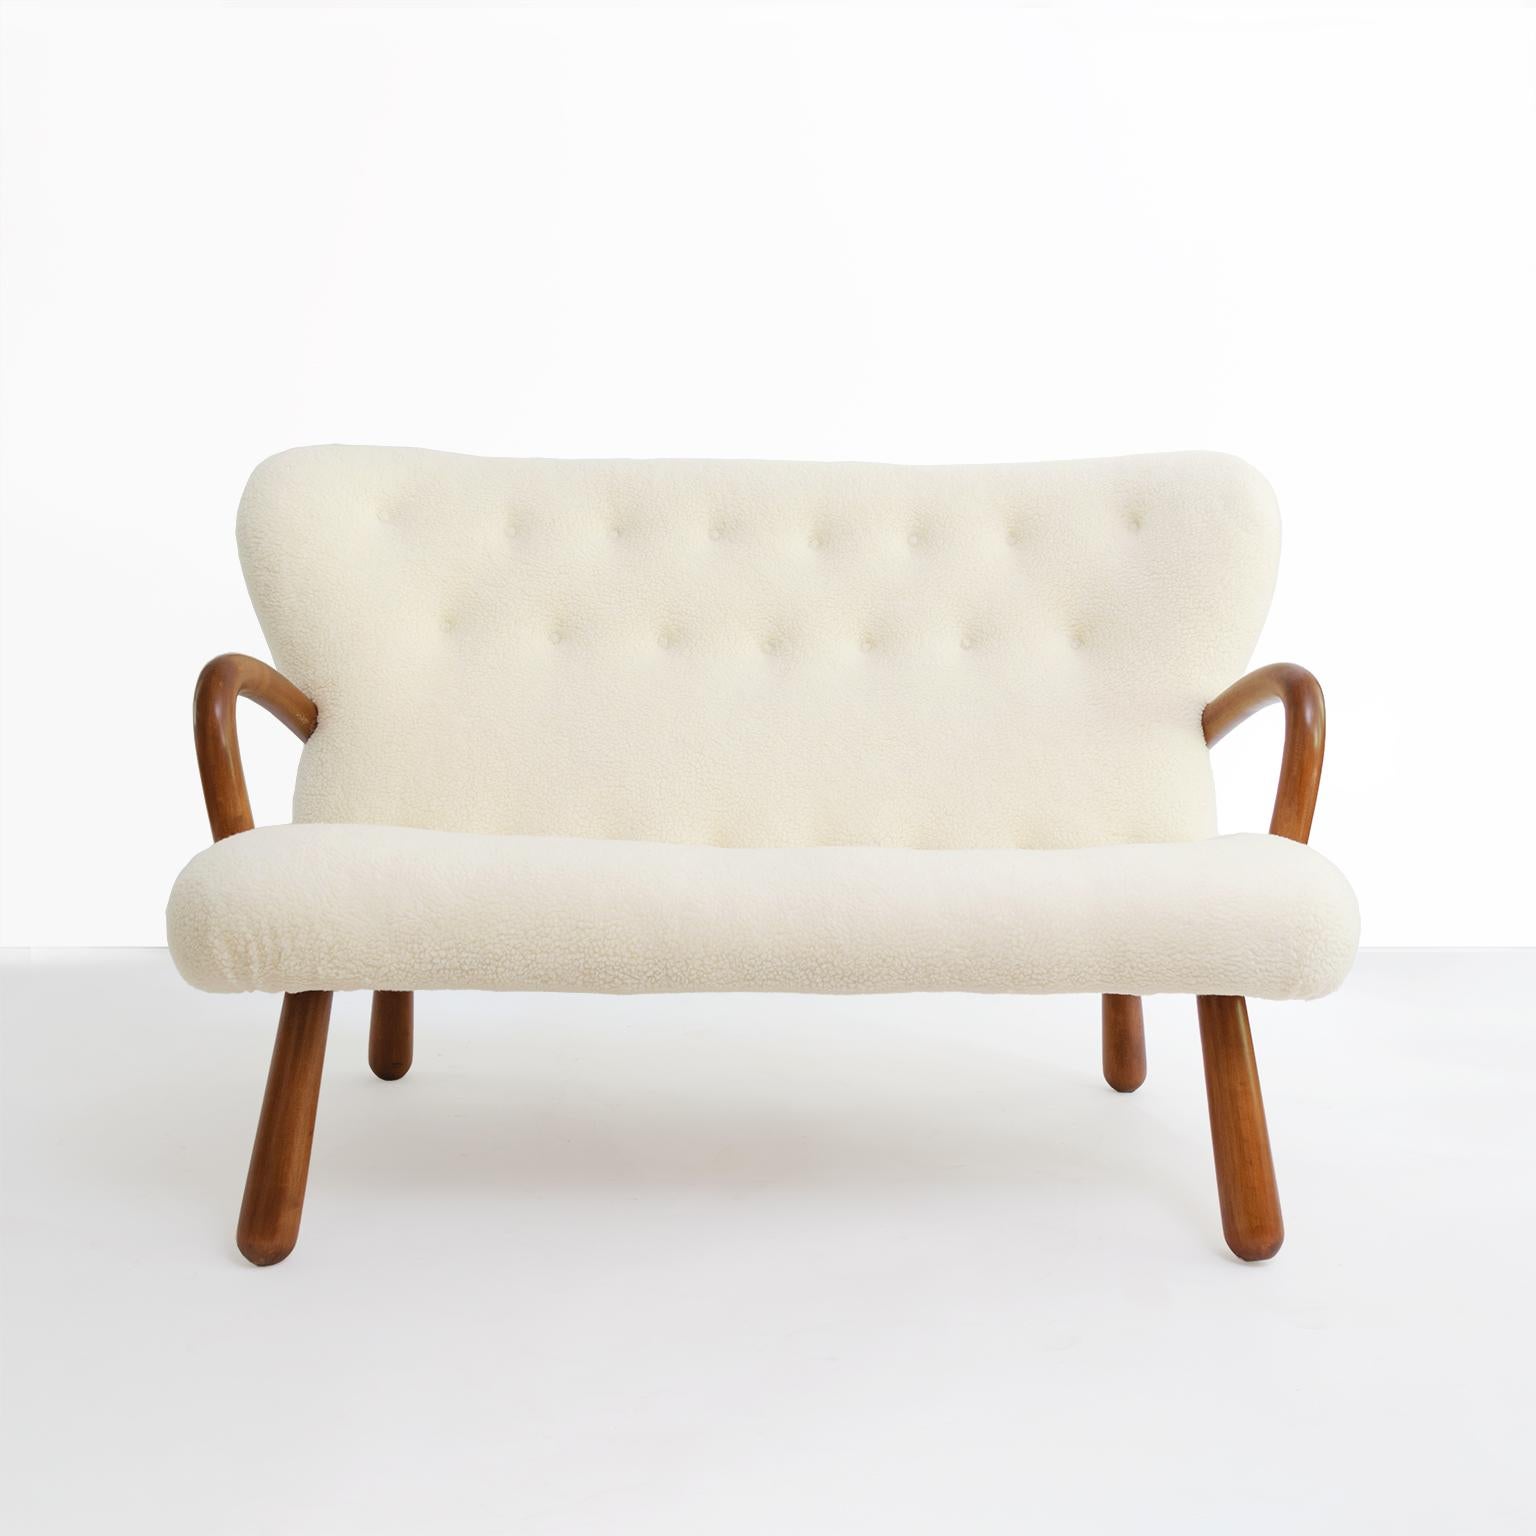 Stained Philip Arctander 'Attributed' Scandinavian Modern Settee in Faux Sheepskin